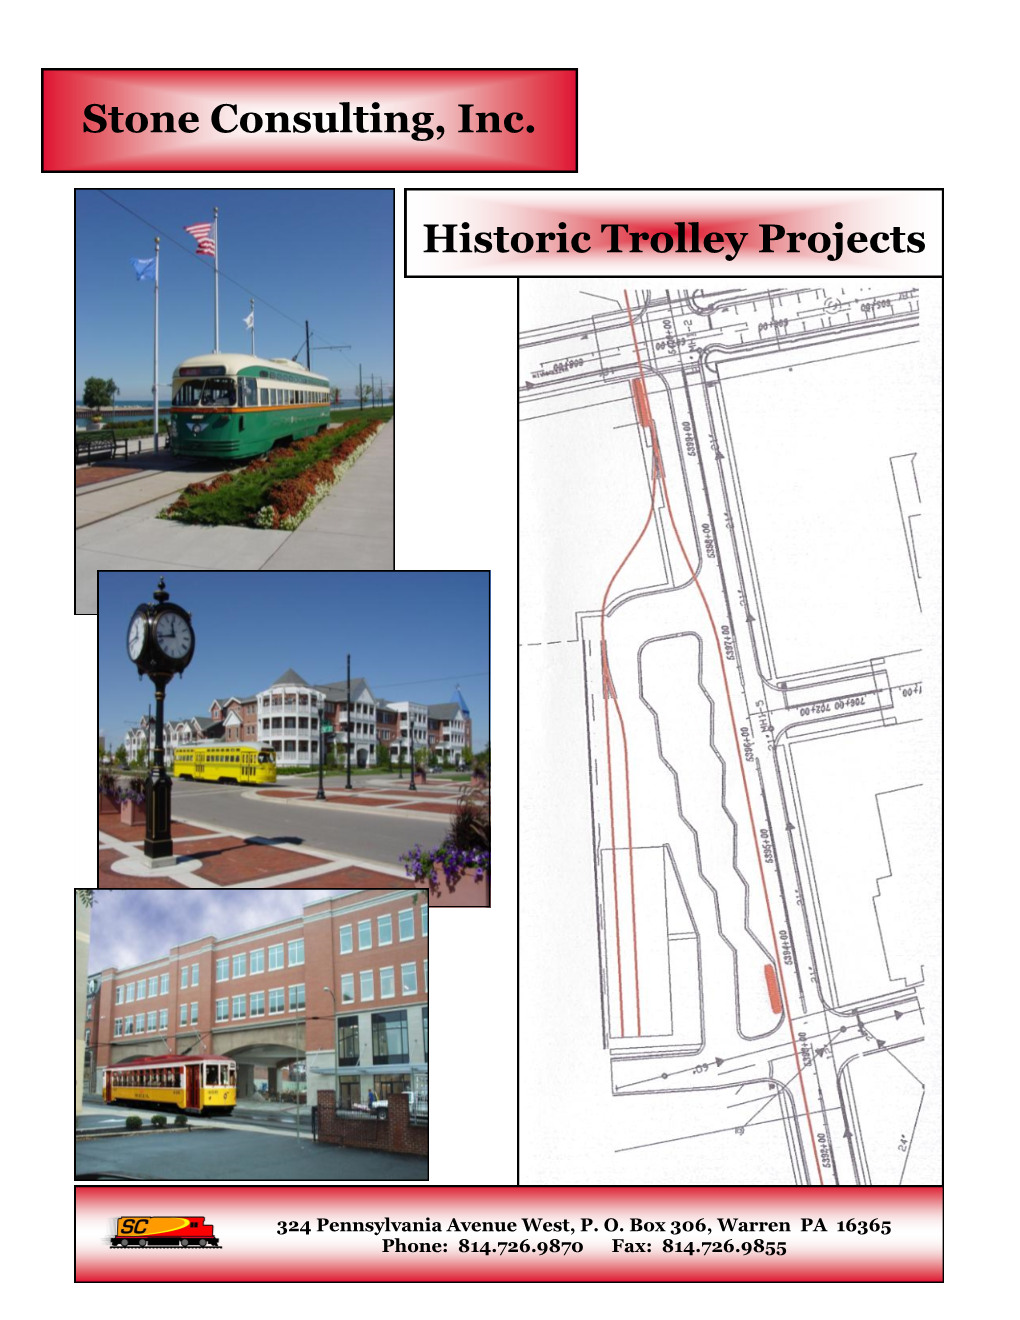 Stone Consulting, Inc. Historic Trolley Projects